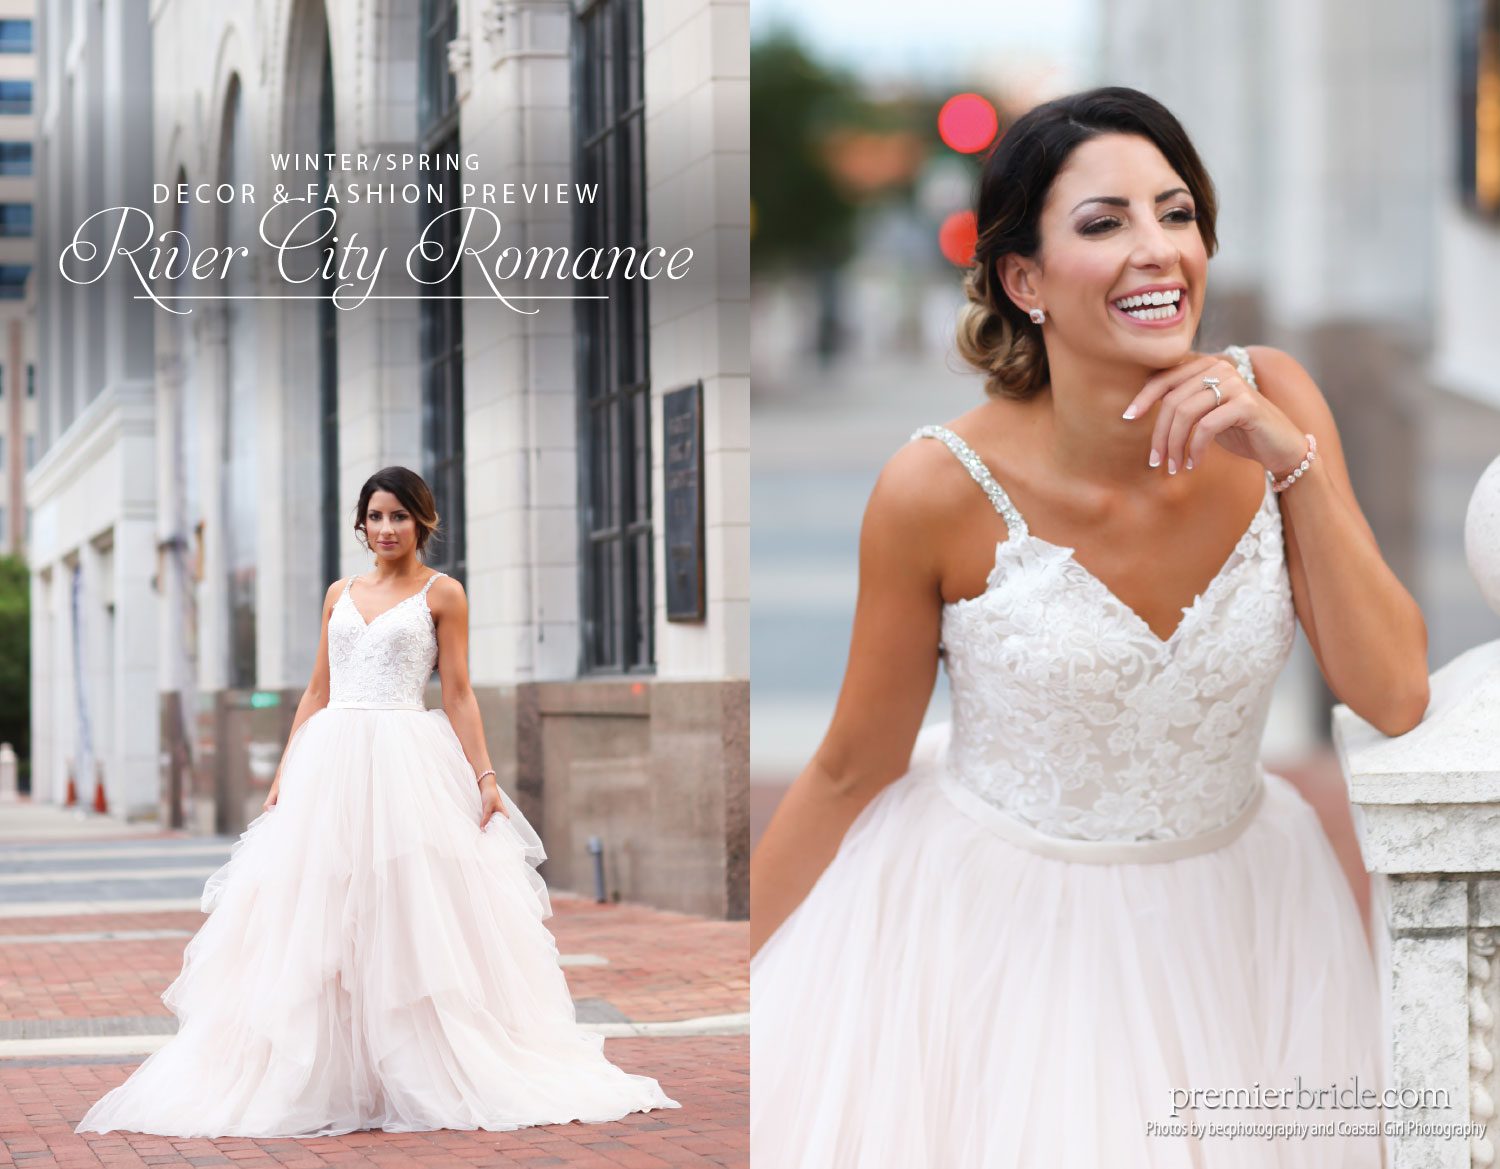 Michaels Formalwear and Bridal, photos by becphotography